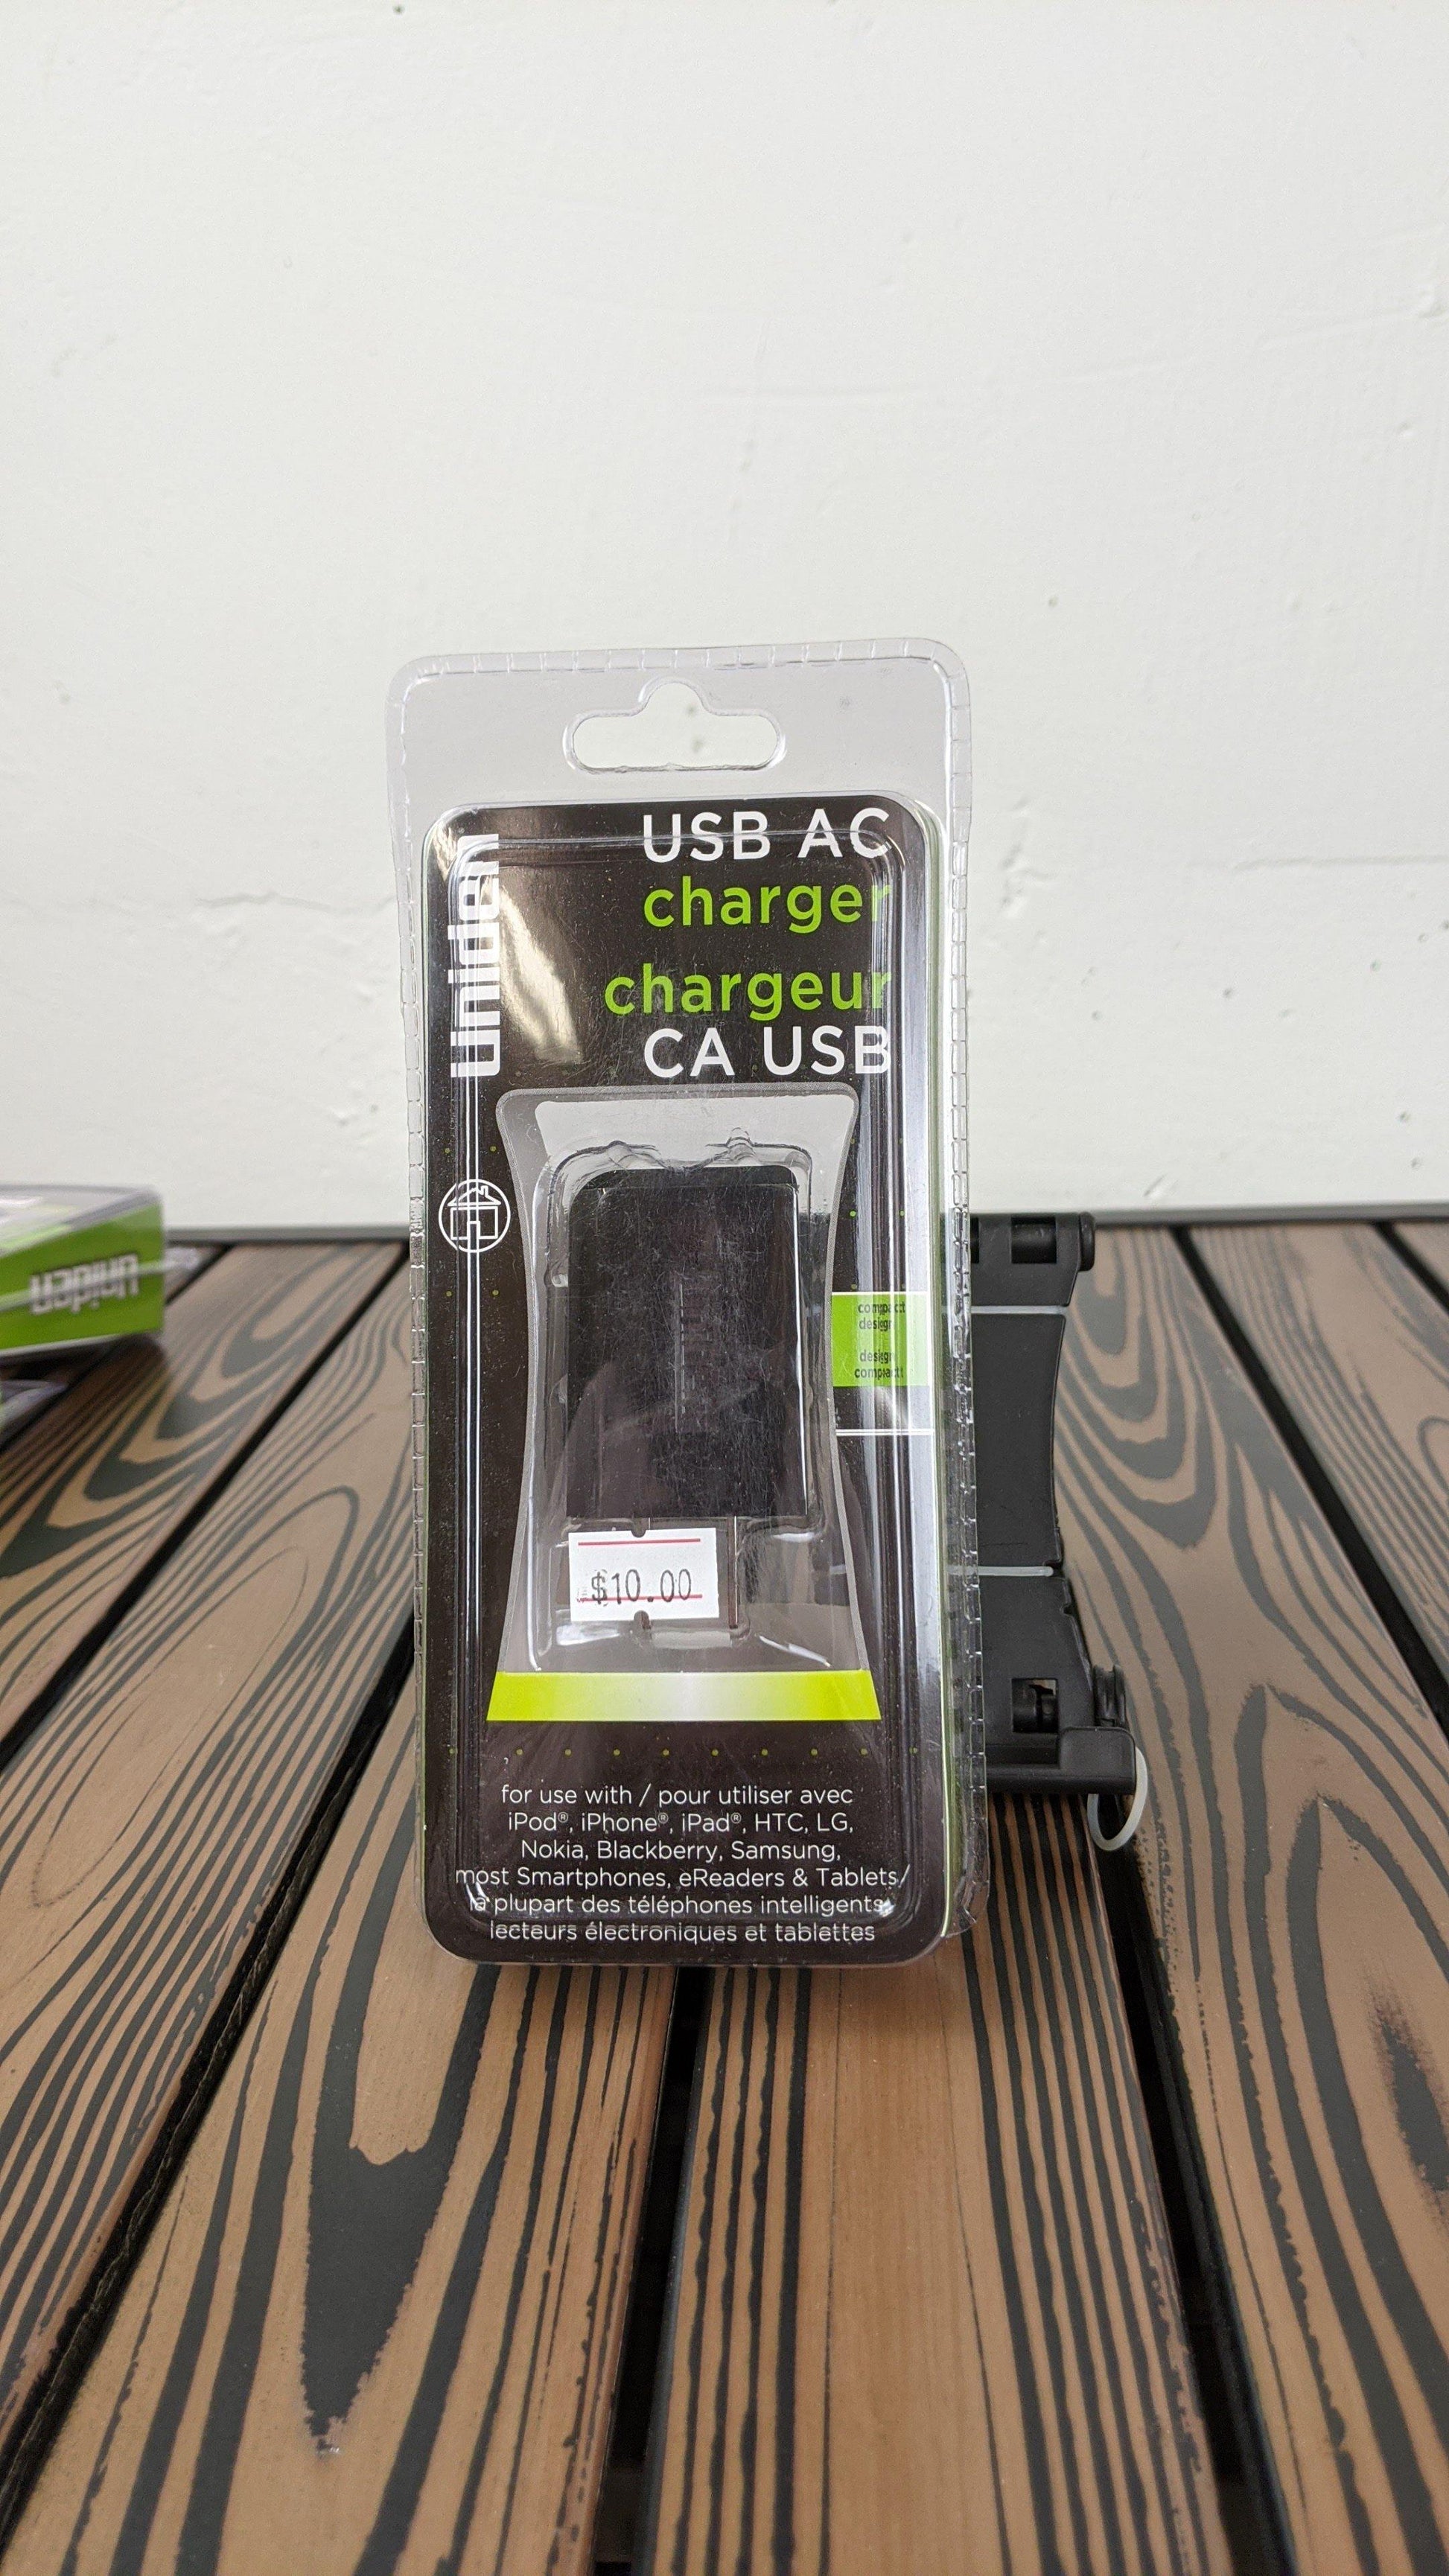 USB Wall Charger - PCMaster Pro 